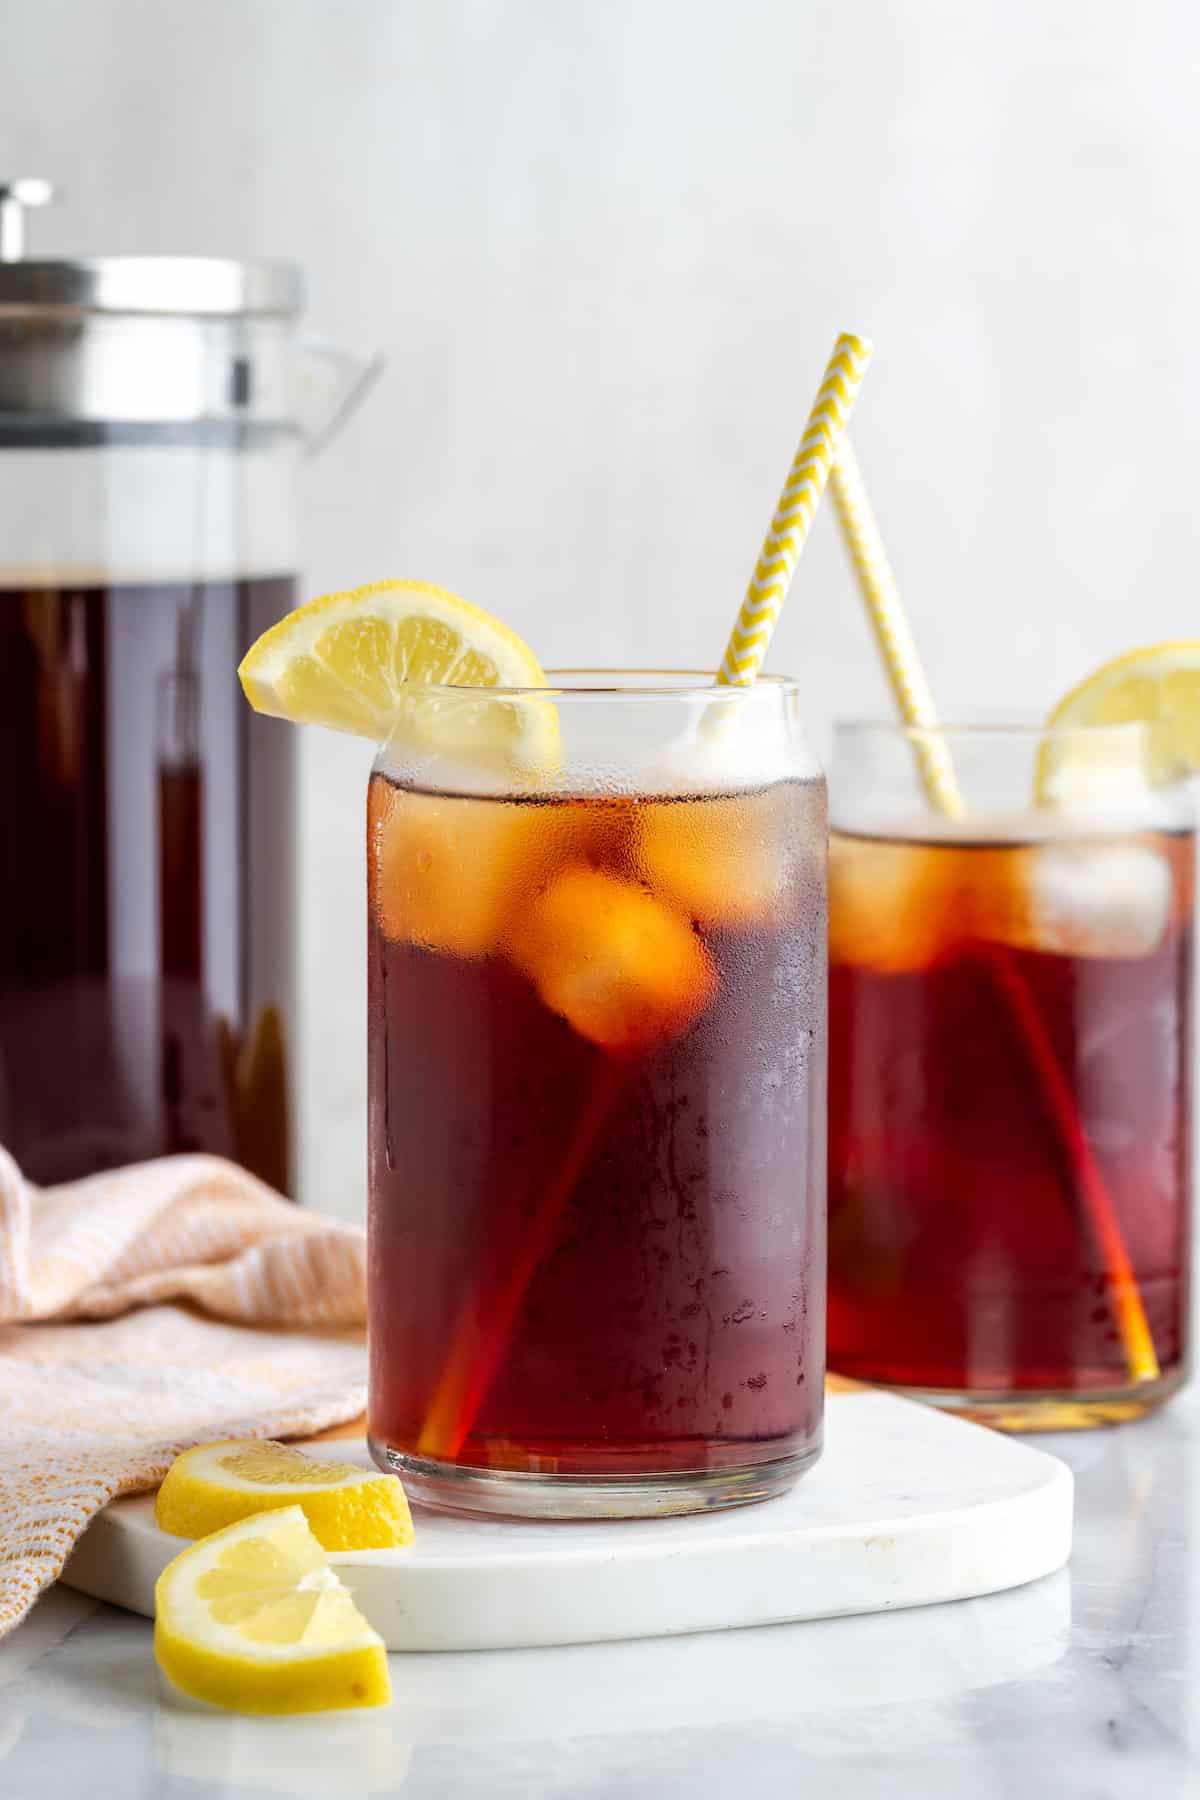 Two glasses of Southern sweet tea with yellow straws and lemon slices